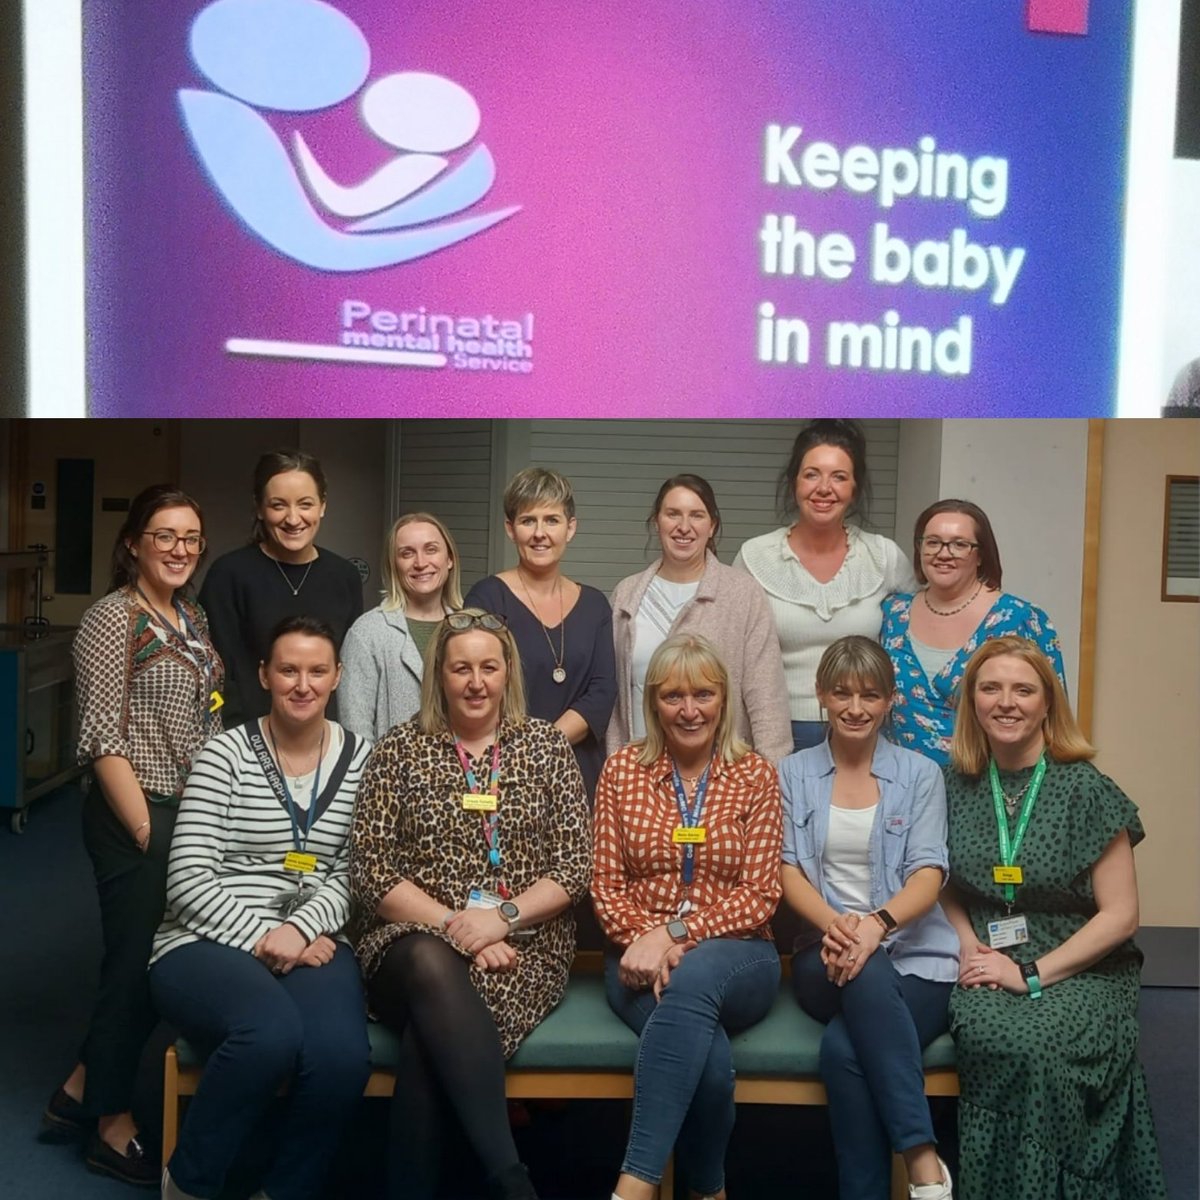 #CoMCTeamEmerald met with the perinatal mental health service for #teamSHSCT . Another vital service for mums and babies that the #CoMCTeamEmerald can liaise with 🤰 @MariaGarvey16 @BriegeAgnew @becsbarr @SarahMcfa008 @Suzannemit10190 @GraceWi75713620 #teamSHSCT #CoMC